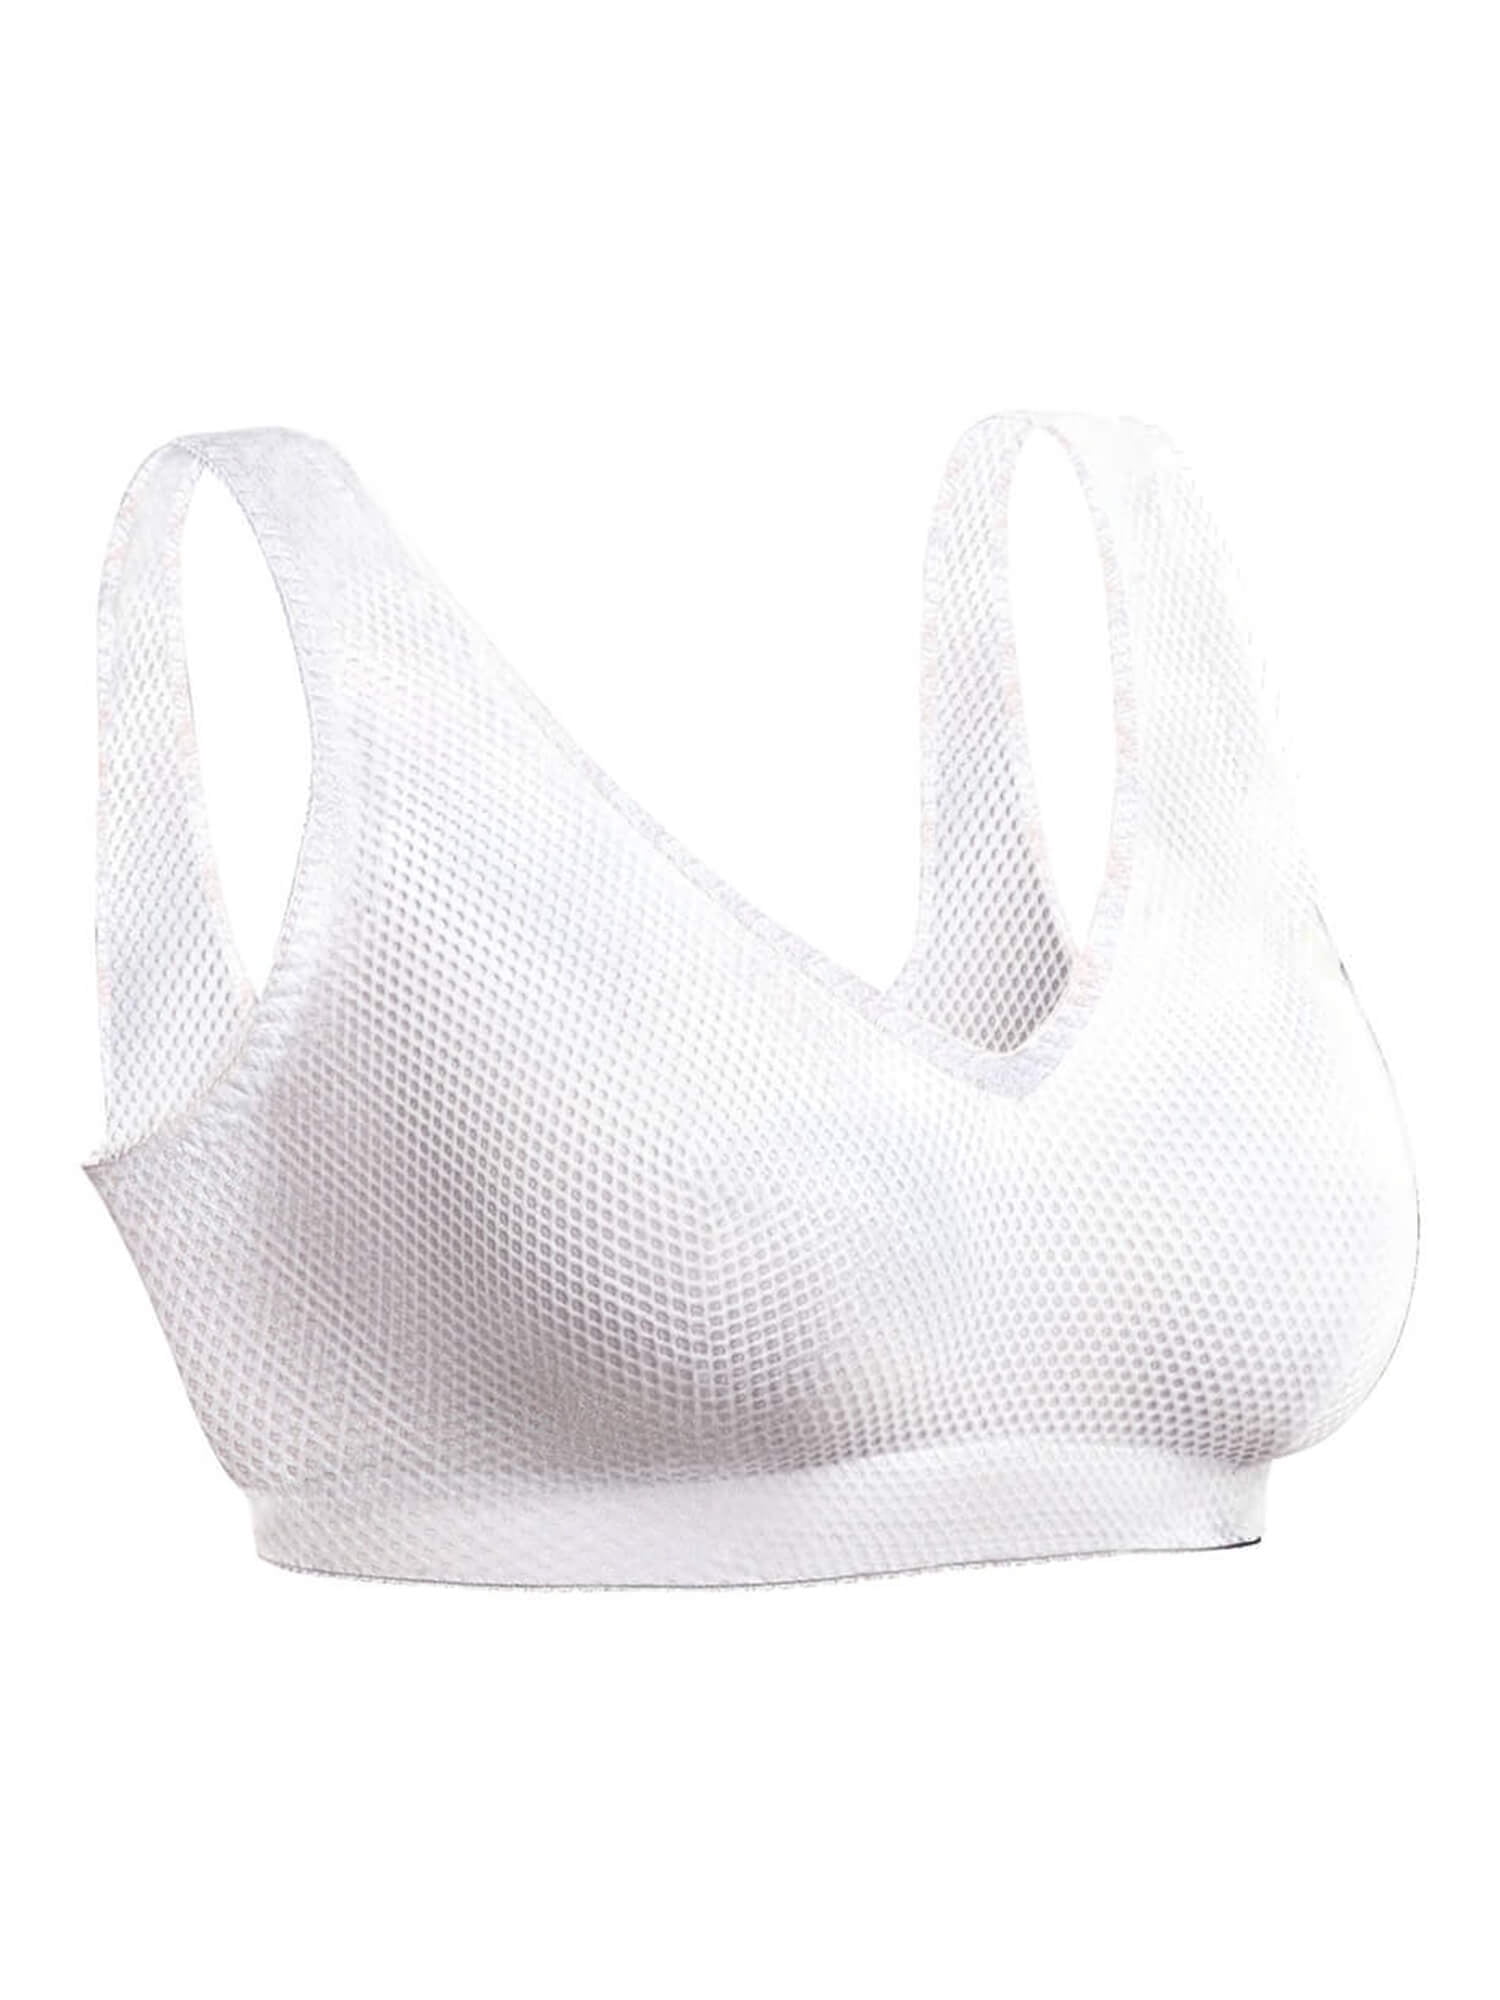 Bodycare 44C Size Bras Price Starting From Rs 219. Find Verified